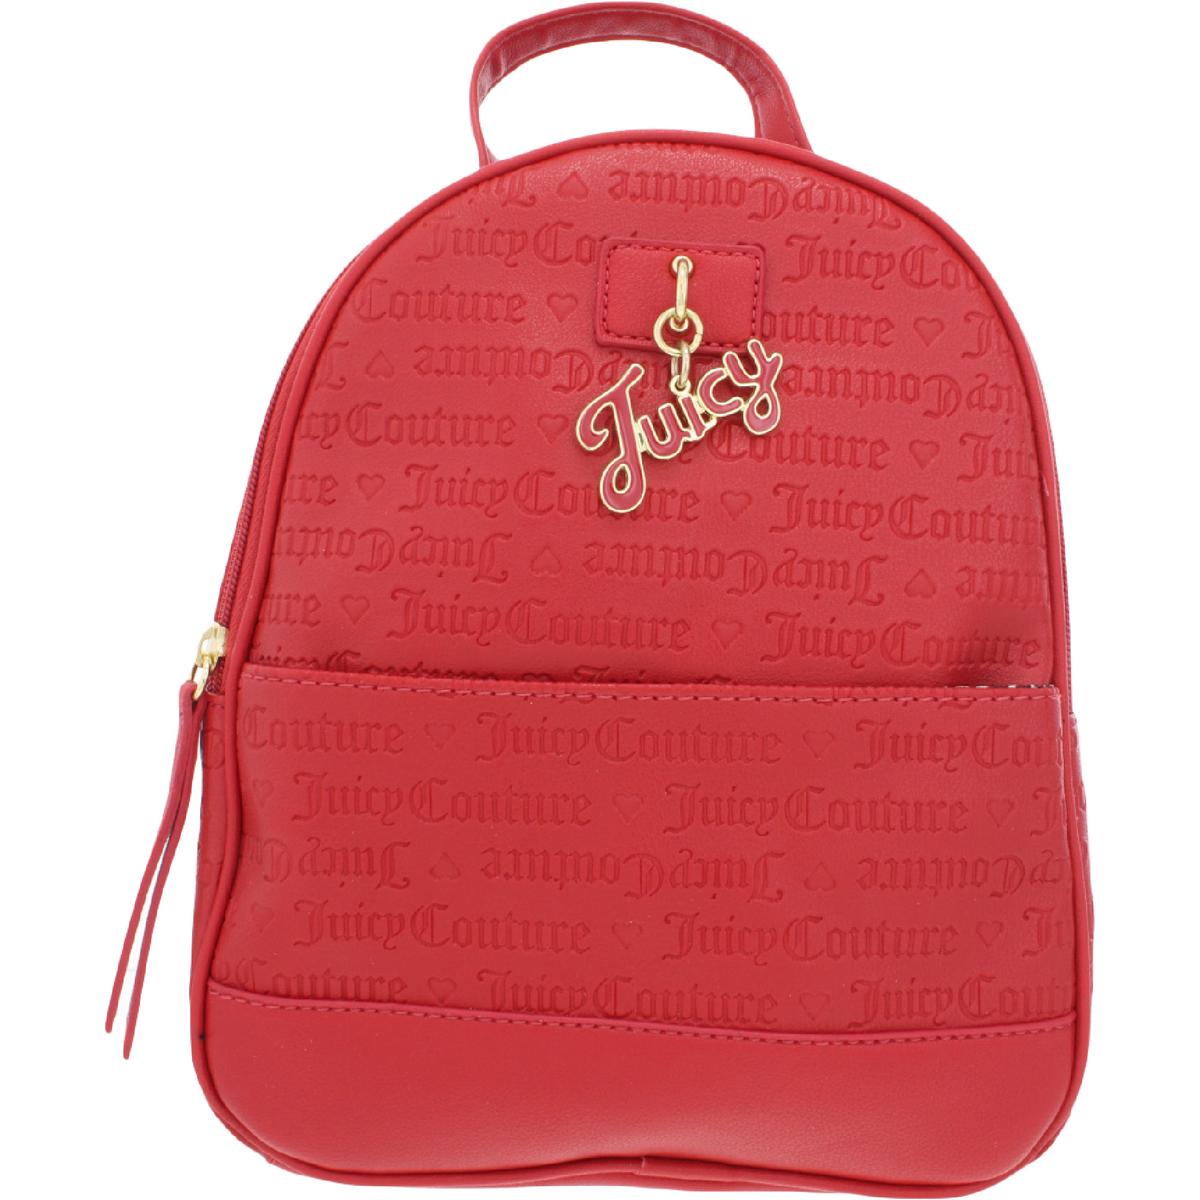 Juicy Couture Love Lock Womens Printed Faux Leather Backpack